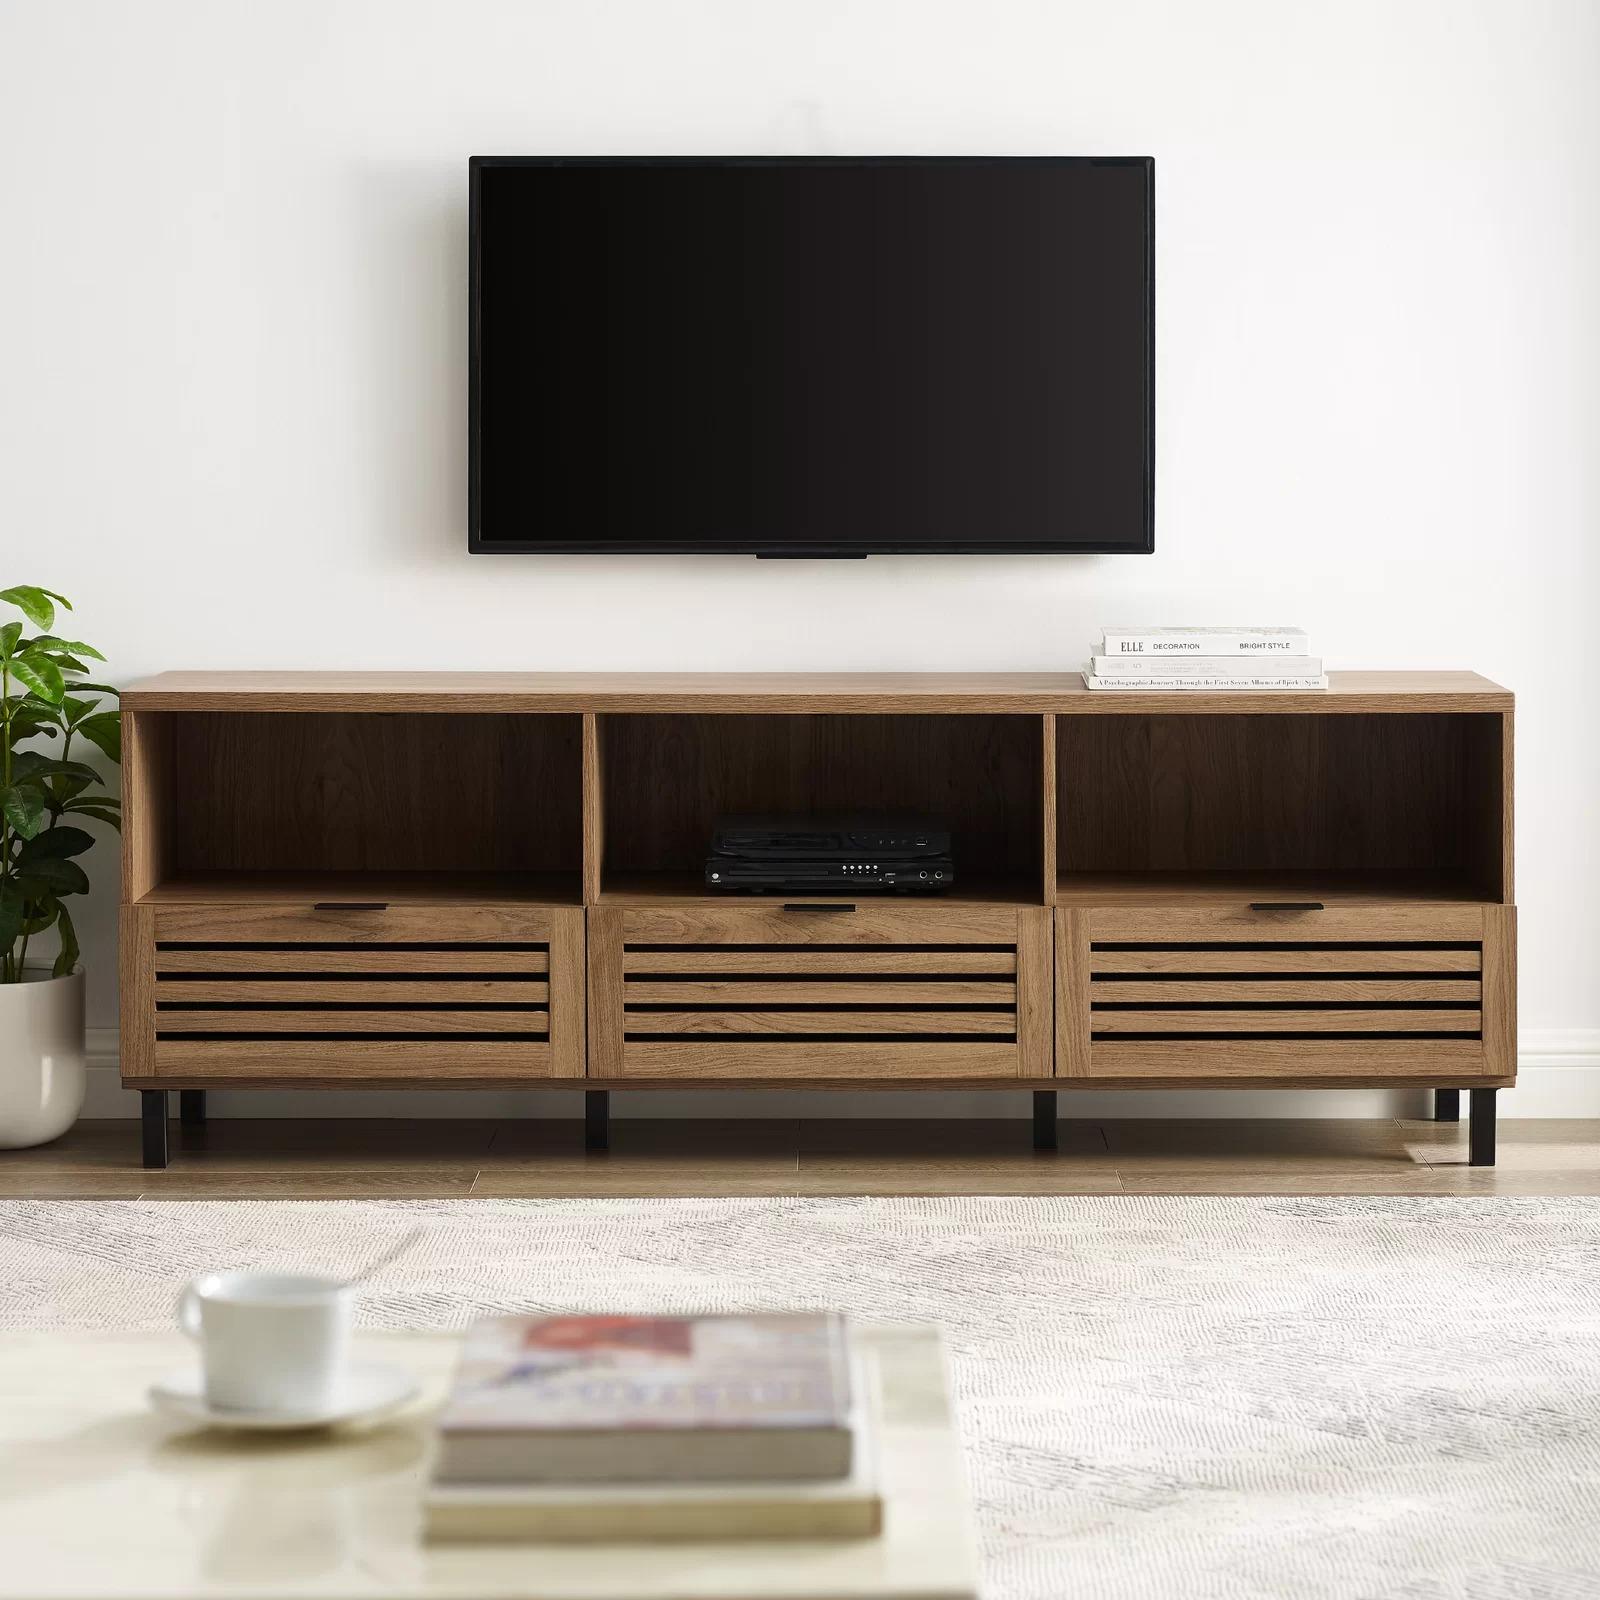 Here's an amazing Black Friday deal you don't want to miss!  2a1784a4 allyssa tv stand for tvs up to 7